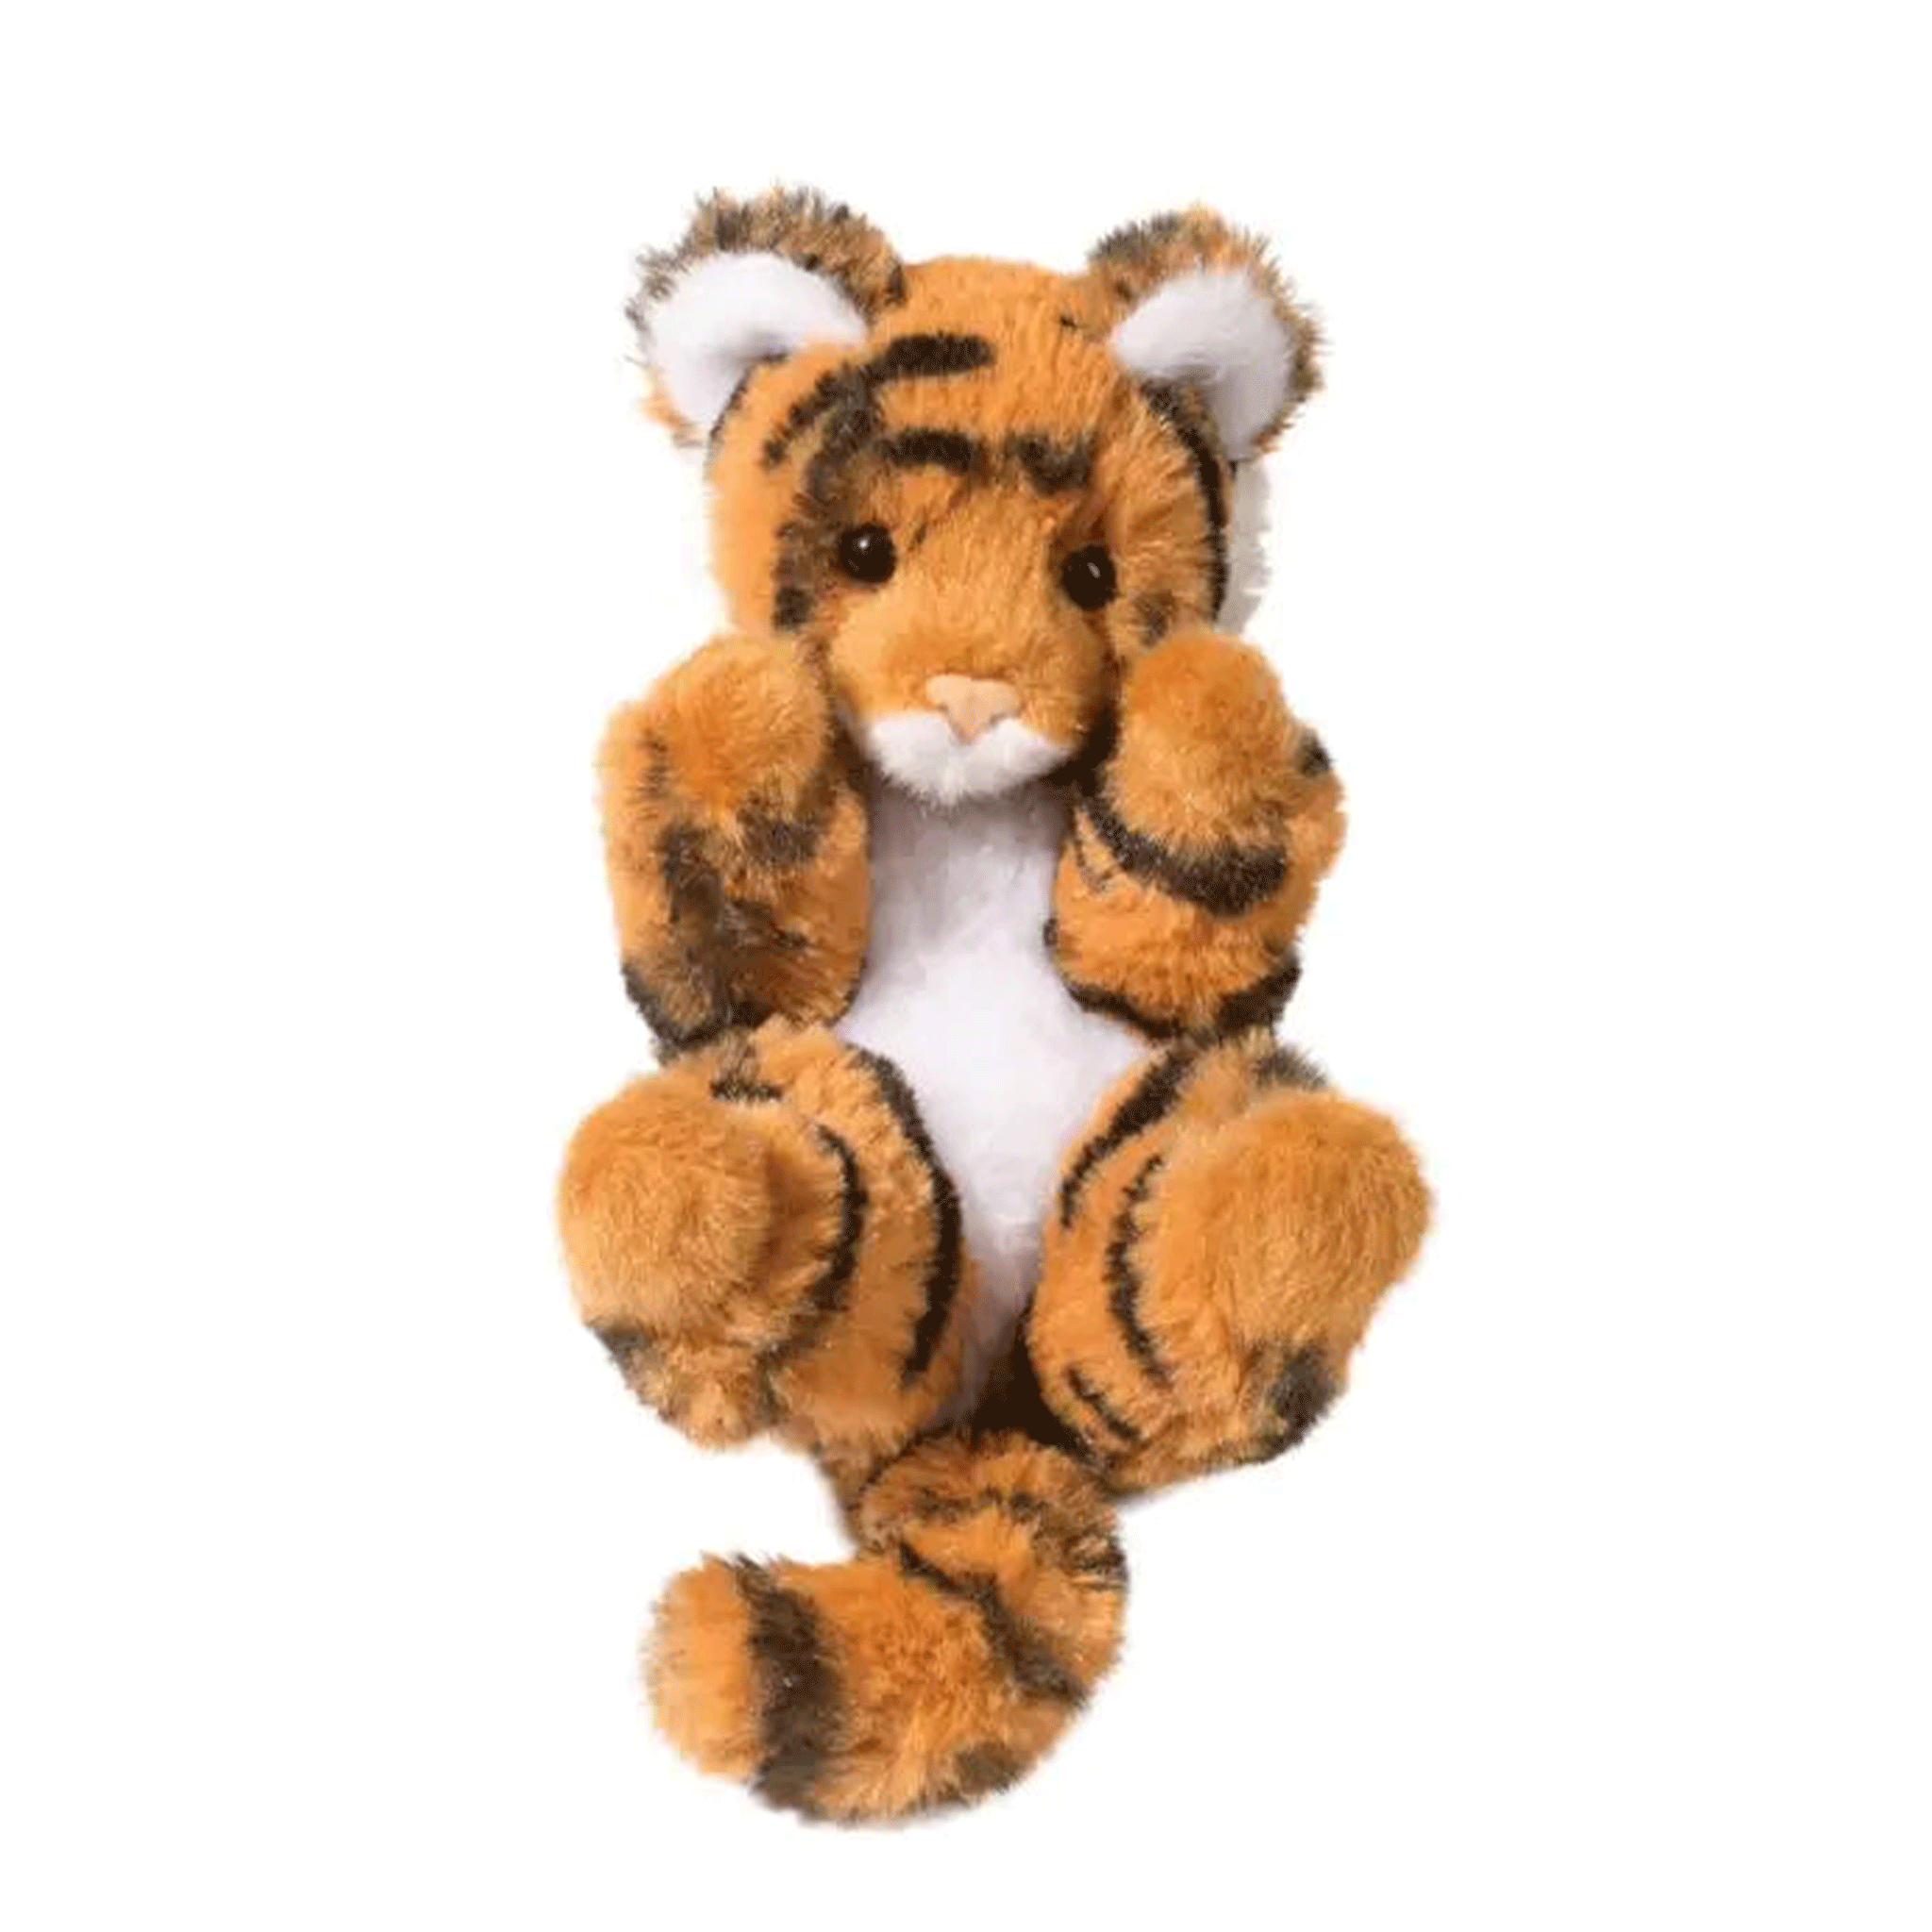 On a white background is a small tiger stuffed animal toy with black stripes and an adorable face. 